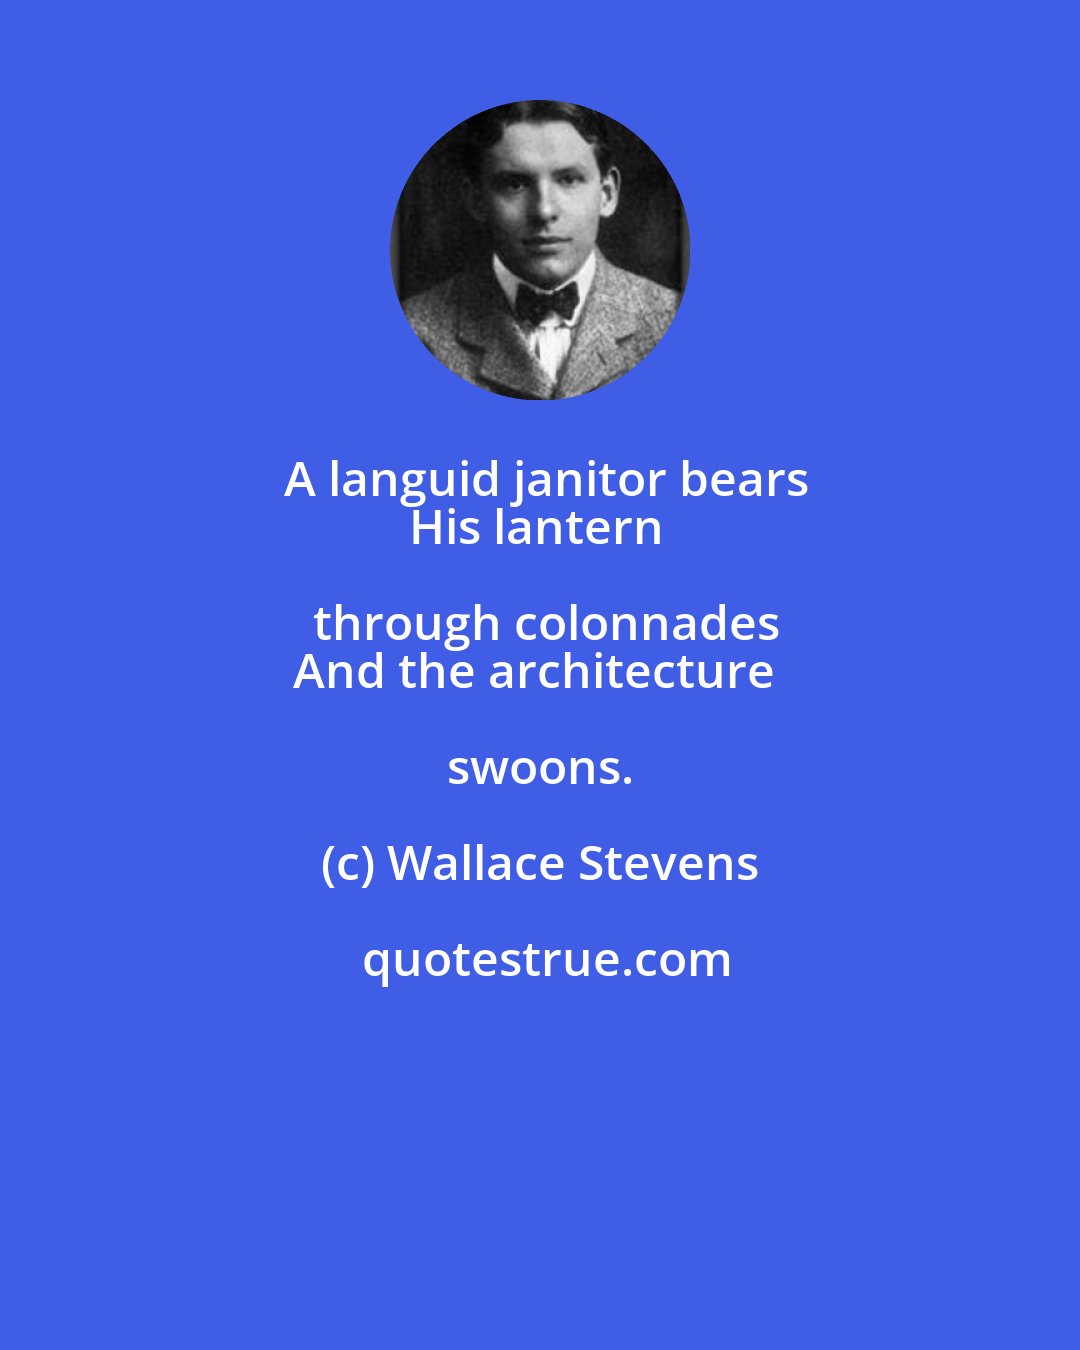 Wallace Stevens: A languid janitor bears
His lantern through colonnades
And the architecture swoons.